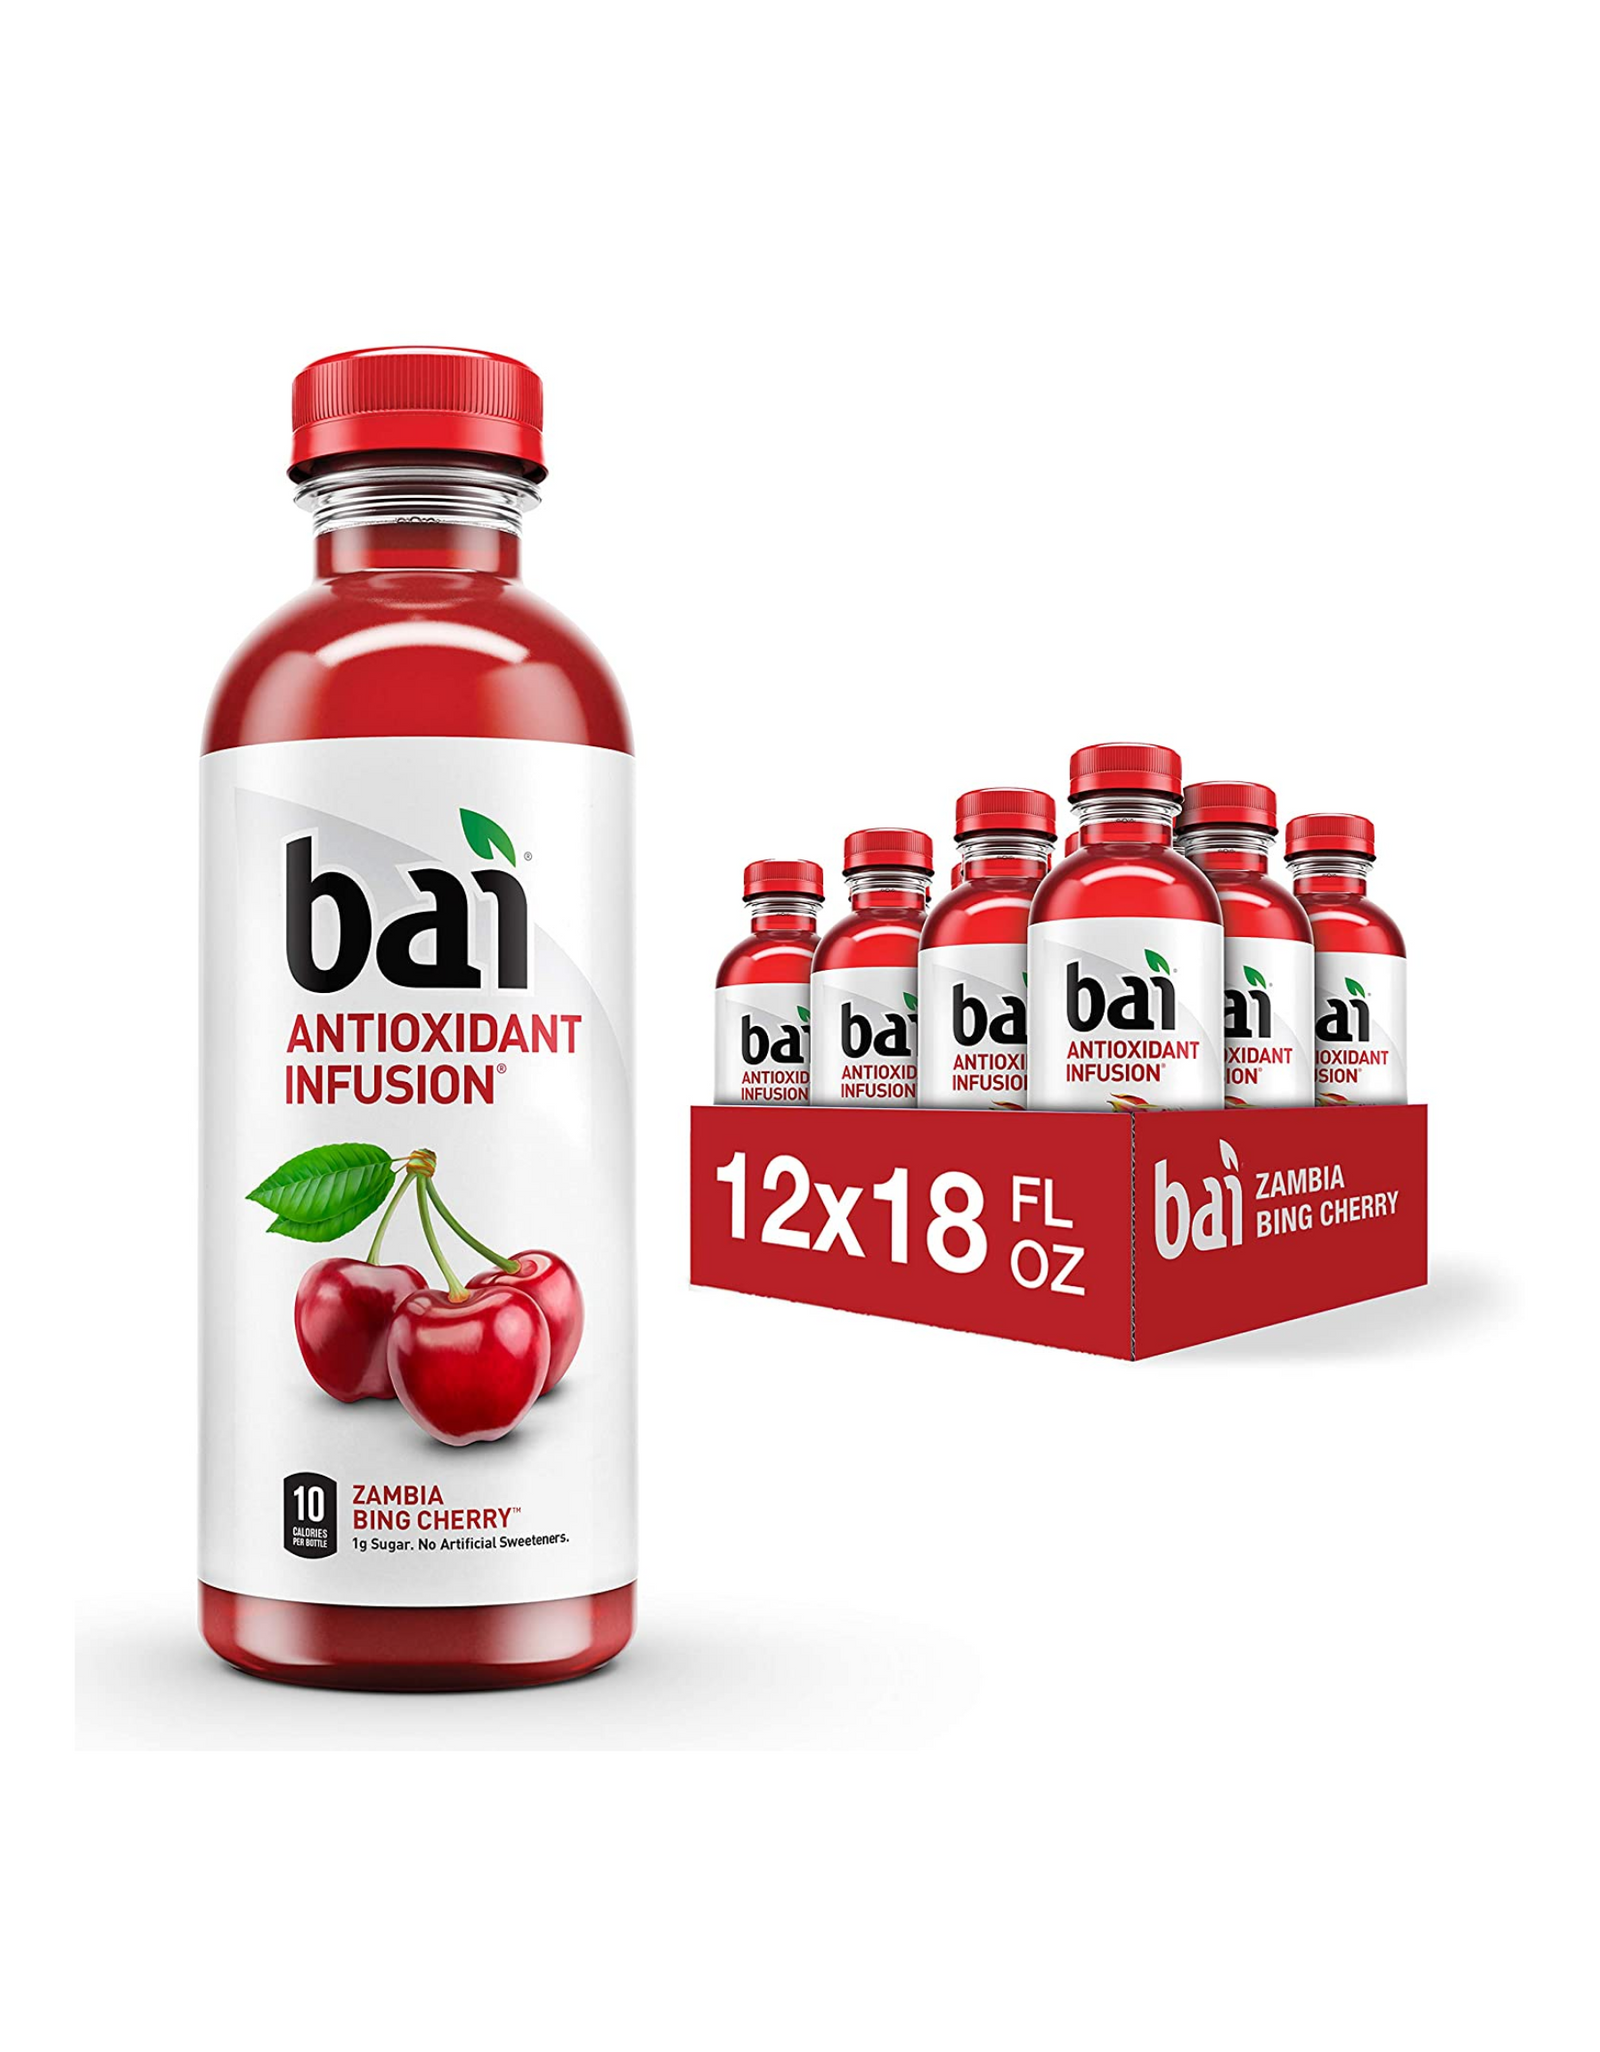 Bai Flavored Water, Zambia Bing Cherry, Antioxidant Infusion, 18 fl oz (Pack of 12)